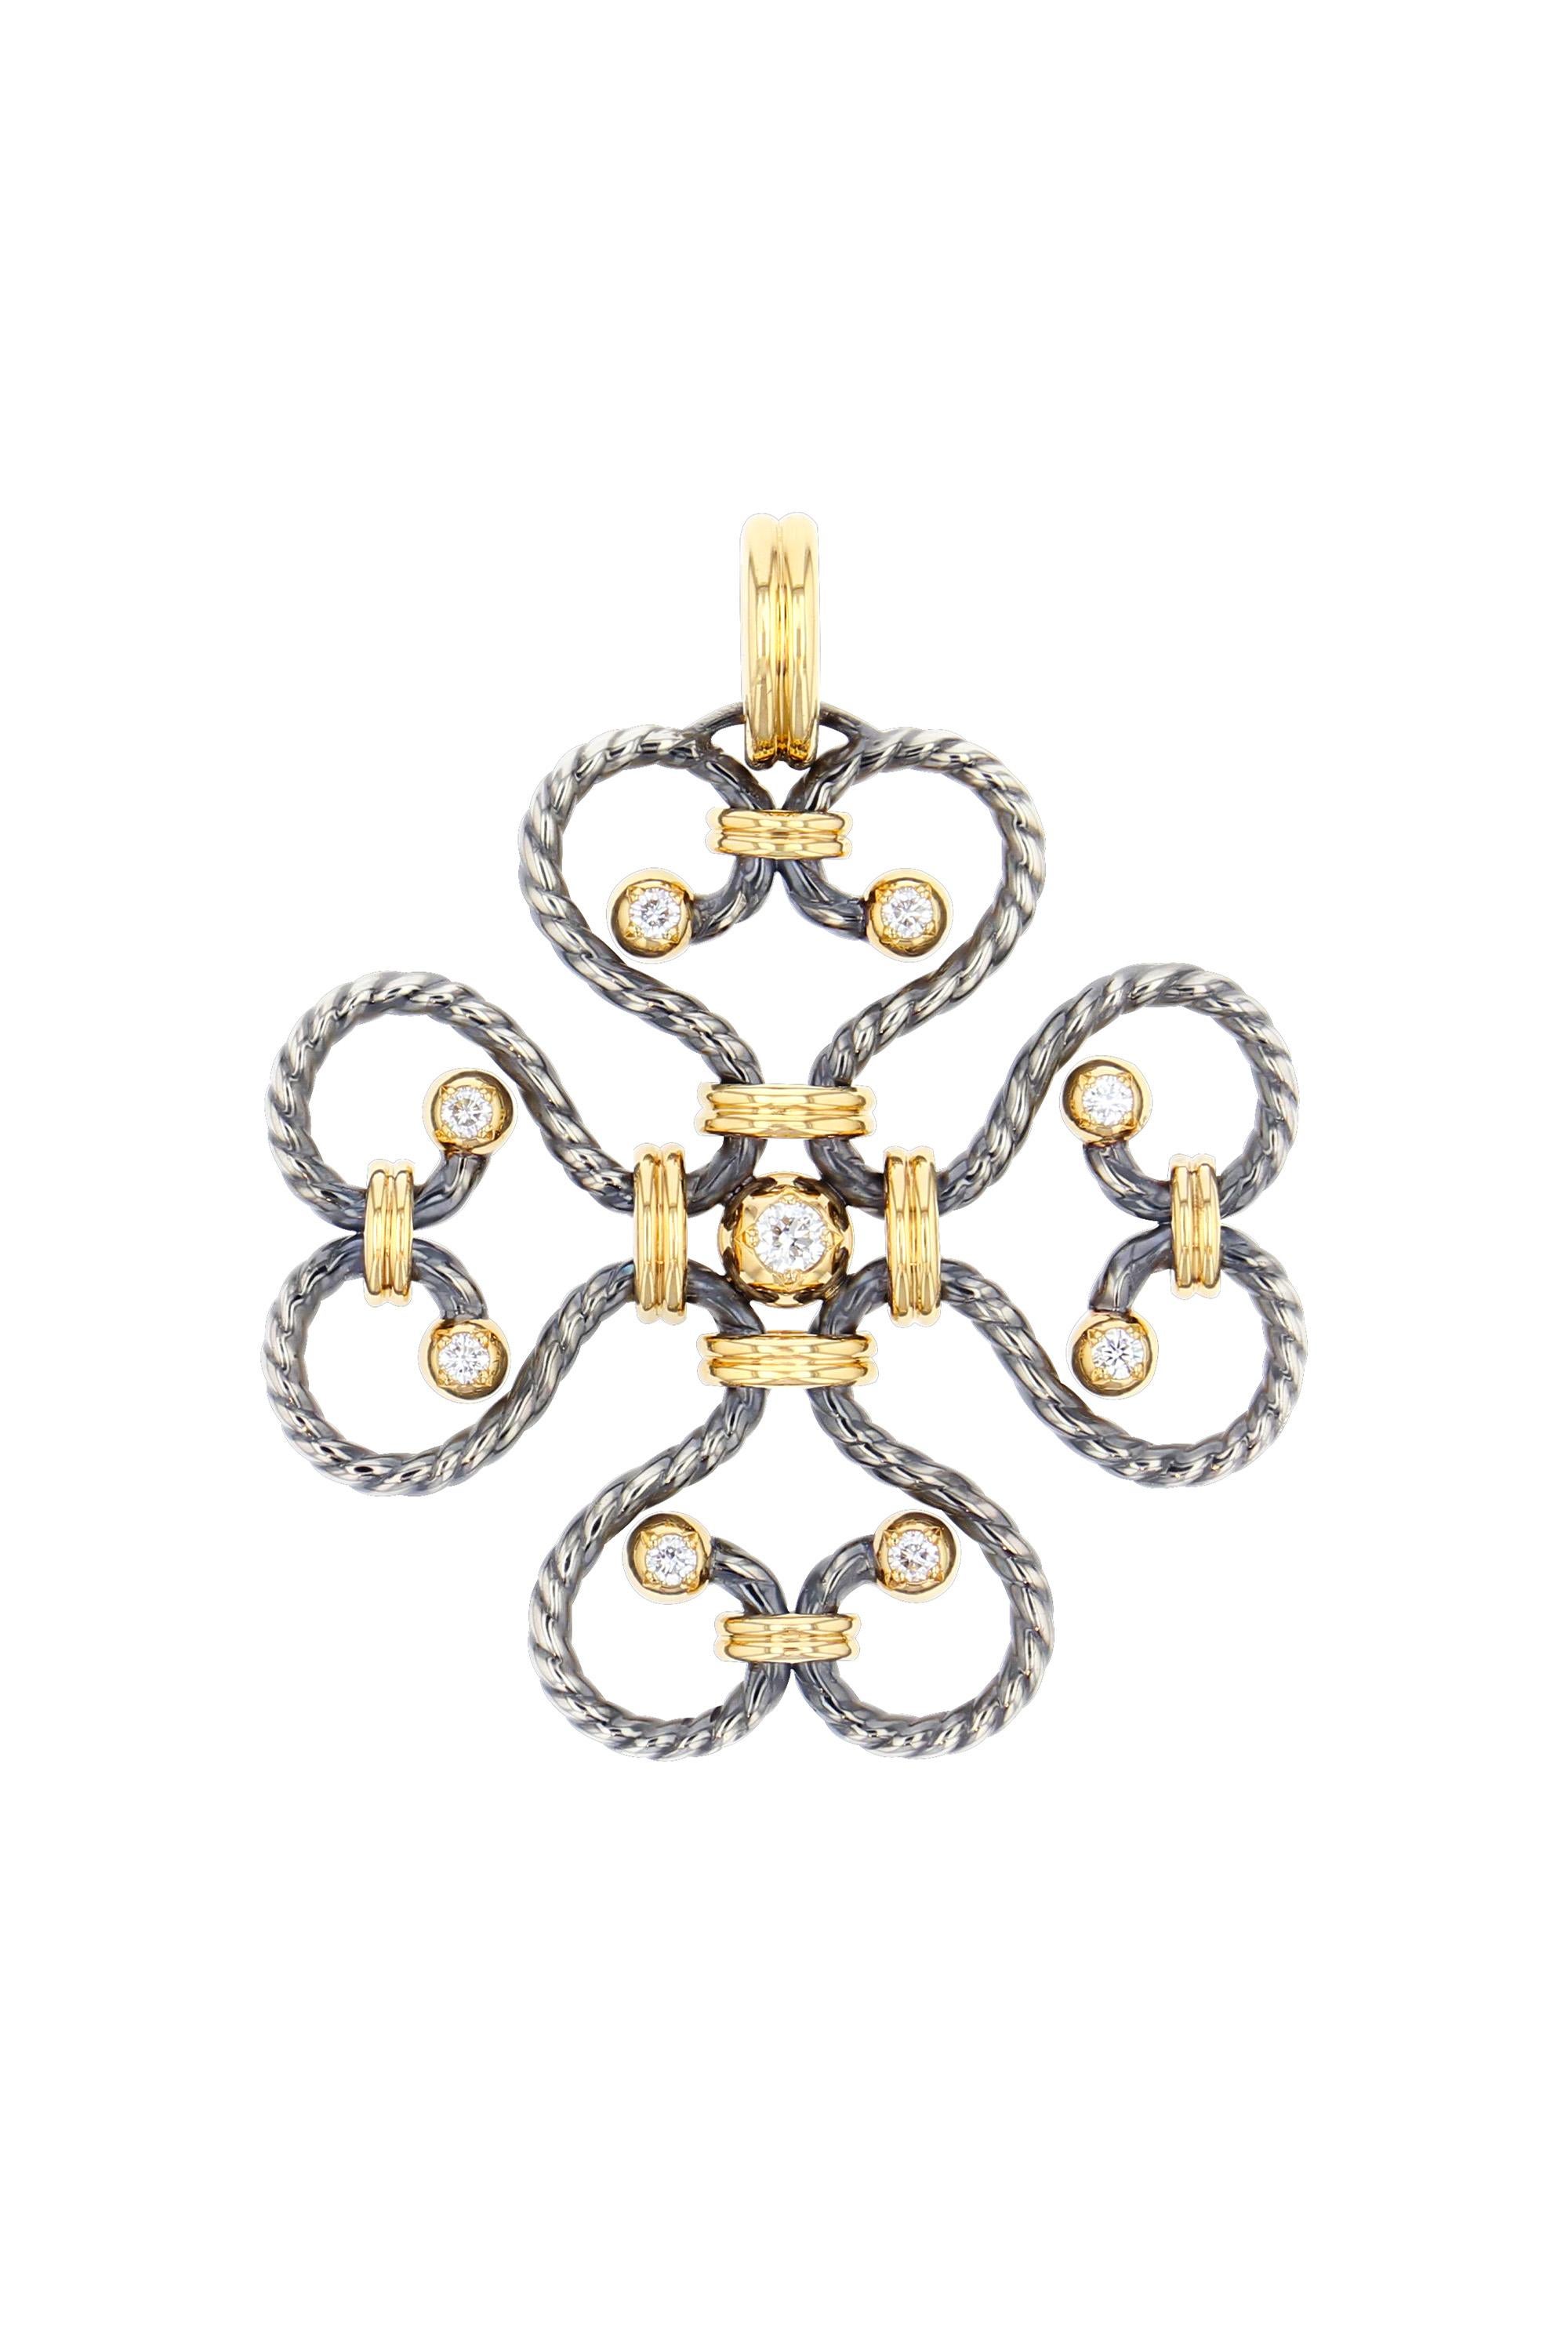 Trèfle charm, serpentine twist of distressed silver punctuated with gold and silver balls set with a diamond held by a set of gold rings. Openable gold bail. 

Sold without chain.

Available with chain on request. 

Details:
GVS Diamonds: 0.45